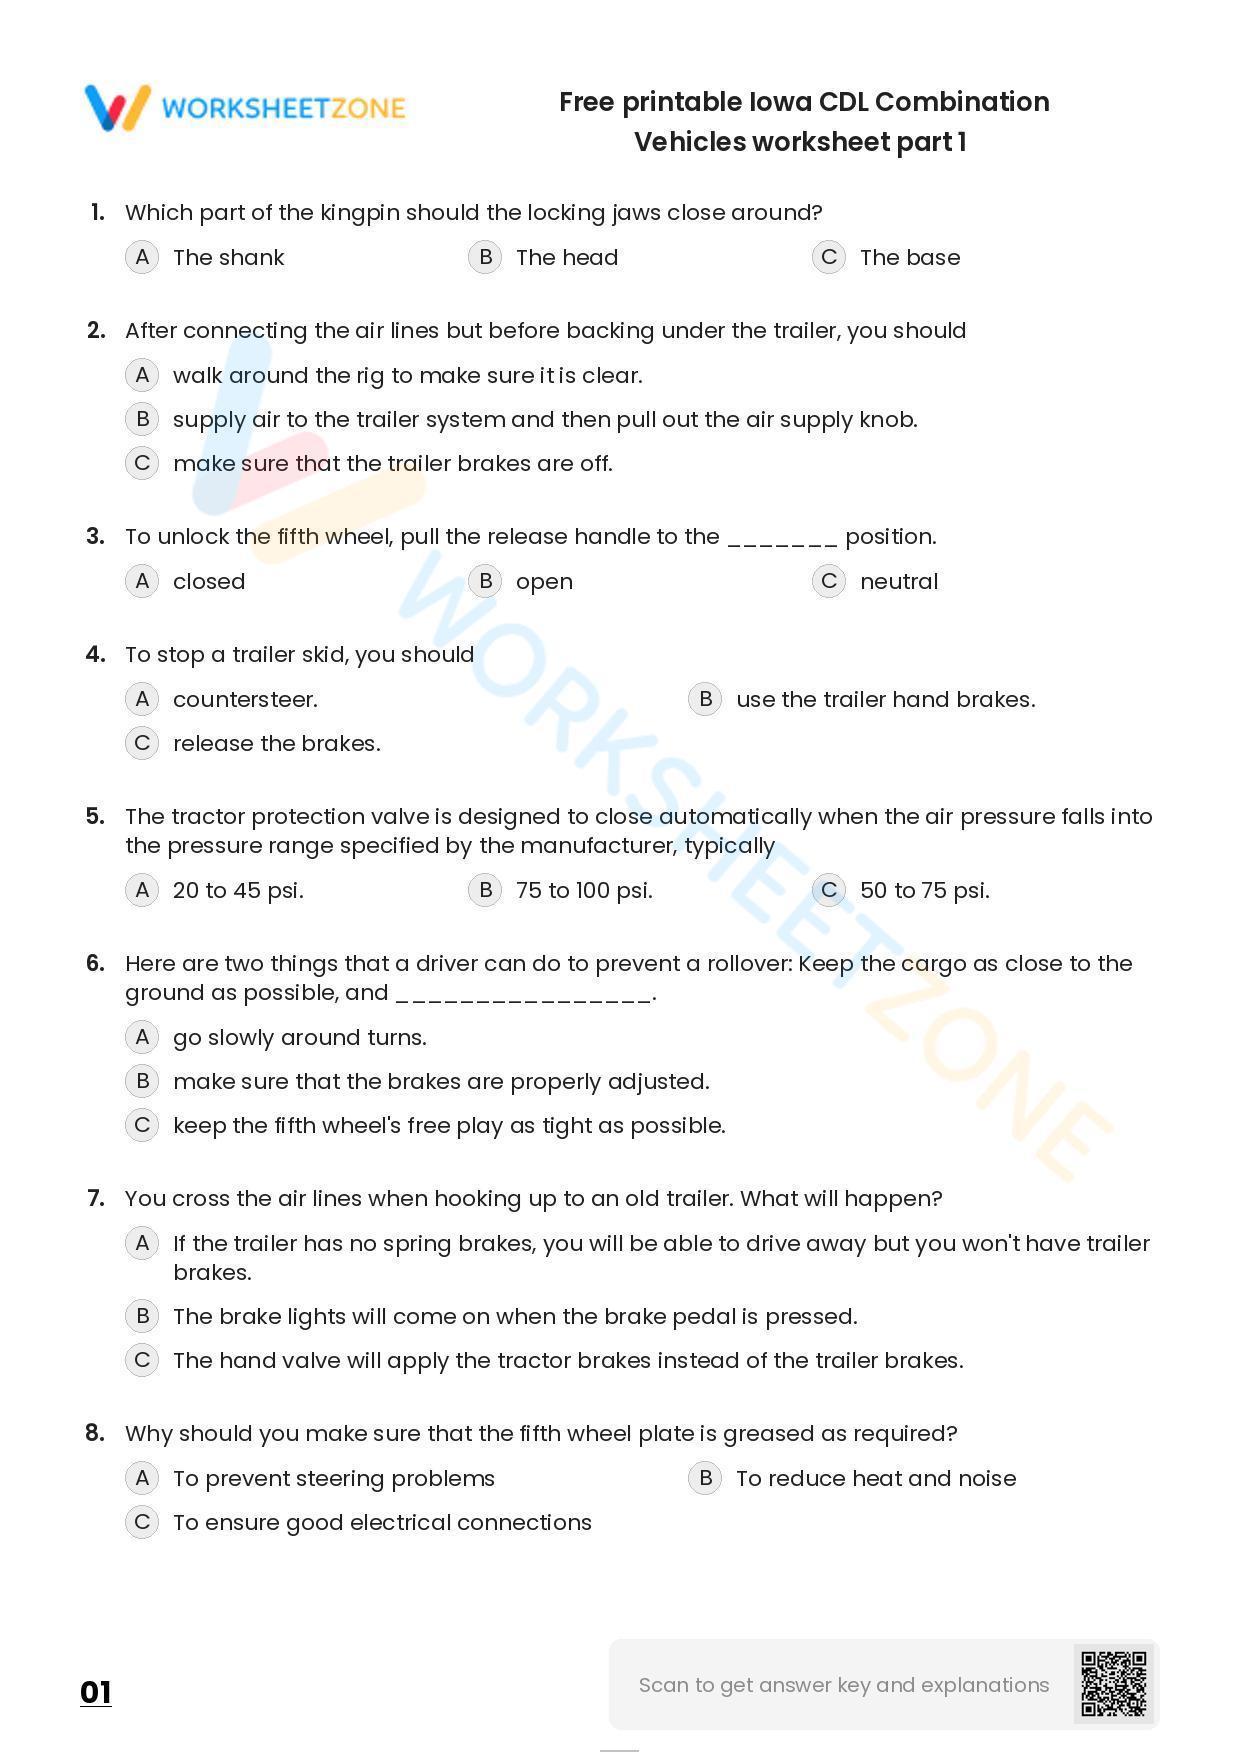 free-printable-iowa-cdl-combination-vehicles-practice-test-worksheet-zone